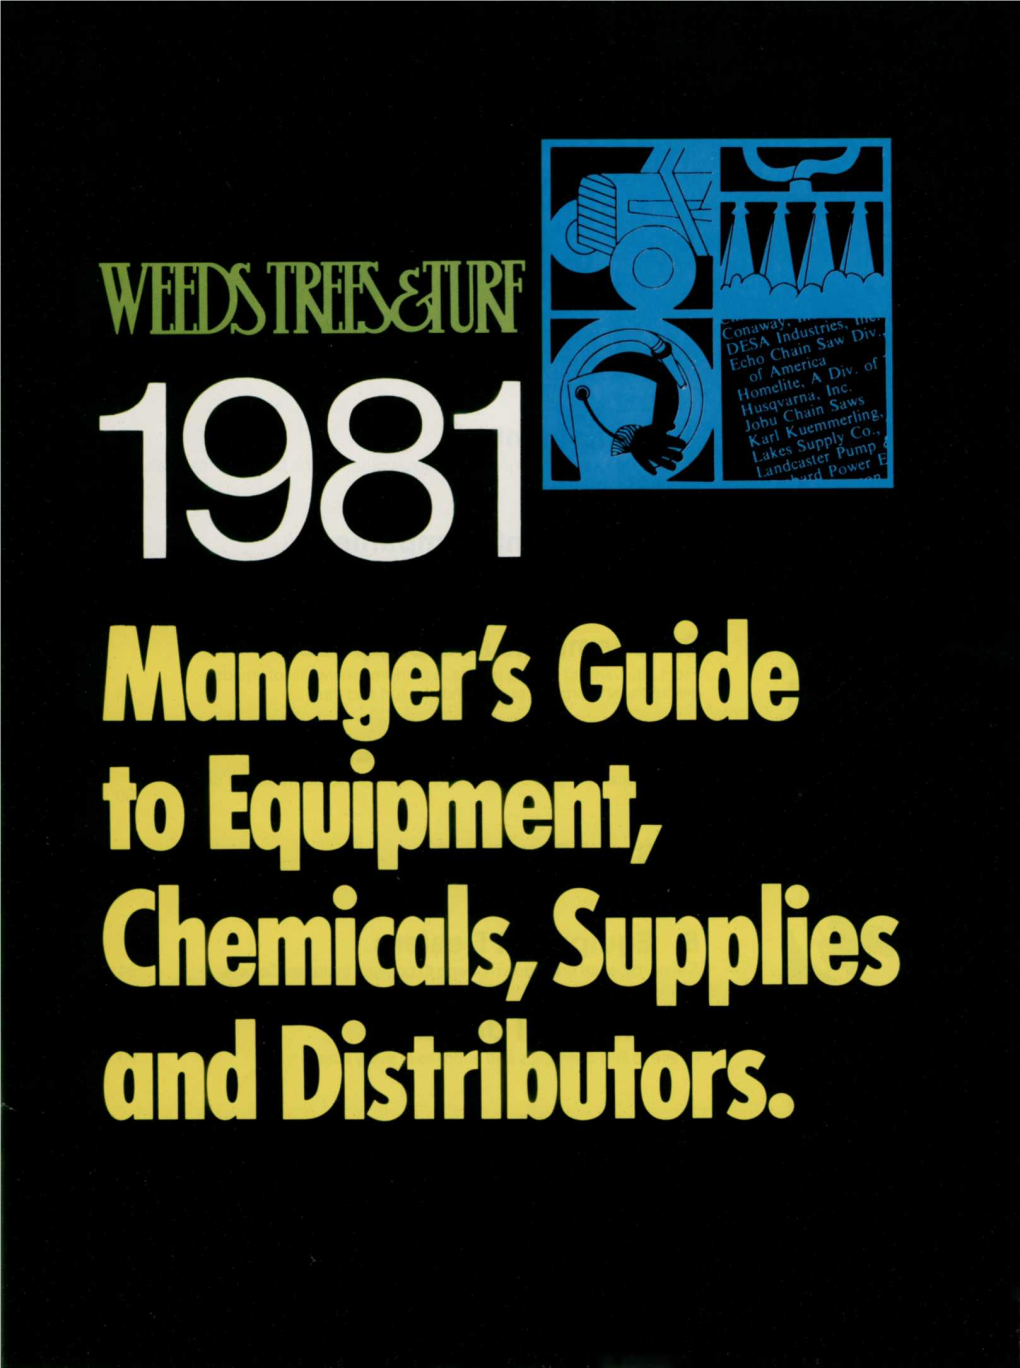 Wfflmmf 1981 Manager's Guide to Equipment, Chemicals, Supplies and Distributors